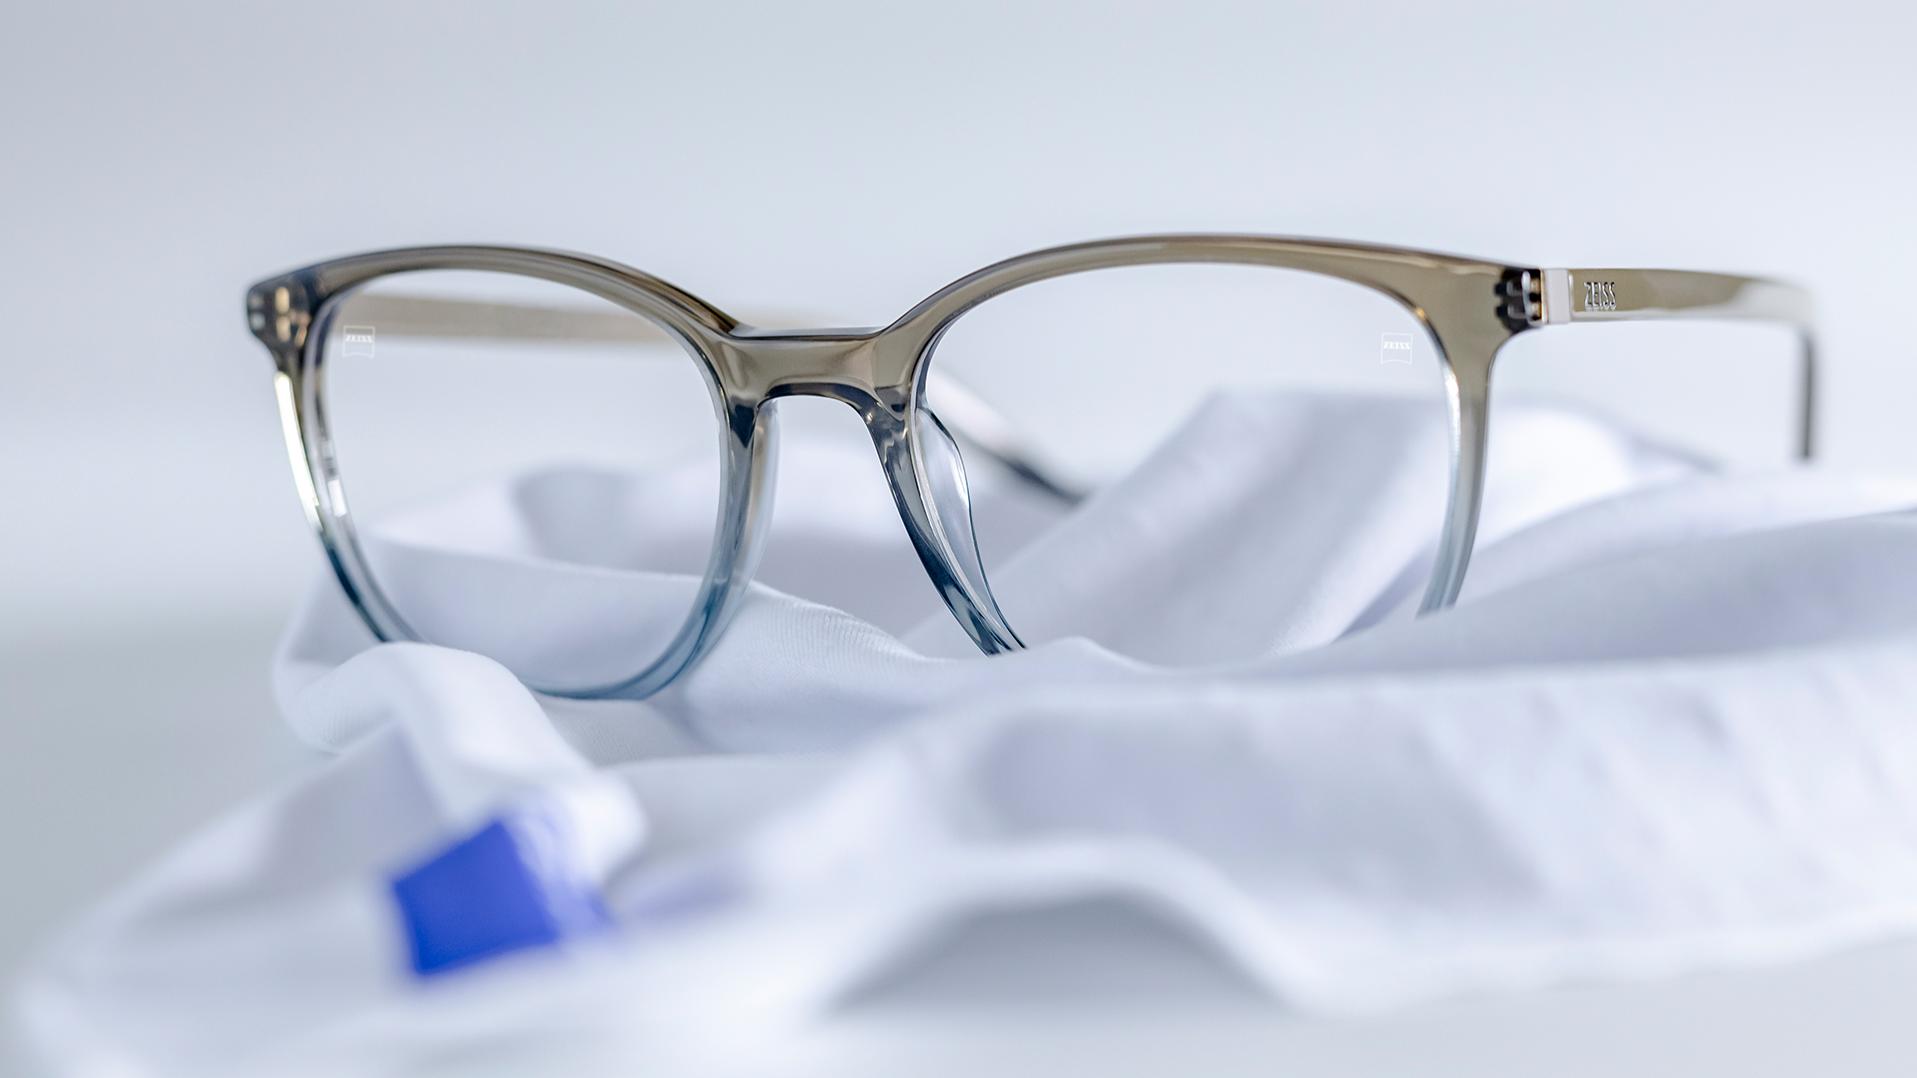 A pair of glasses with grey-blue frames and ZEISS lenses with DuraVision® coating lies on a white microfibre cloth.